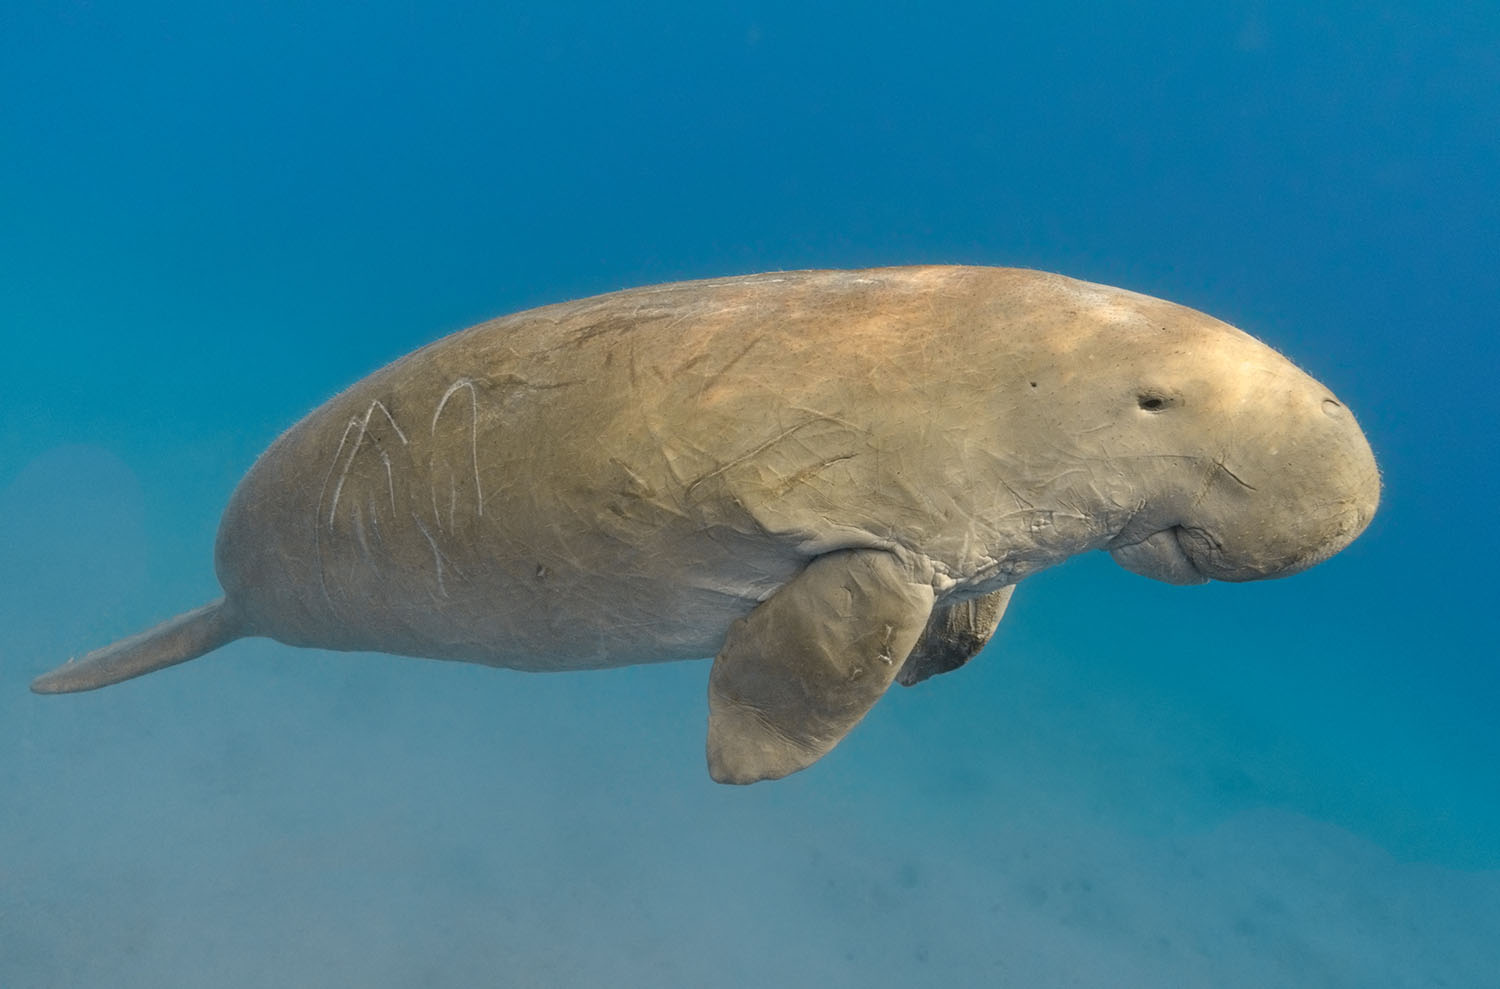 Dugongs used to be common marine animals but now fewer than 1,000 remain in the wild